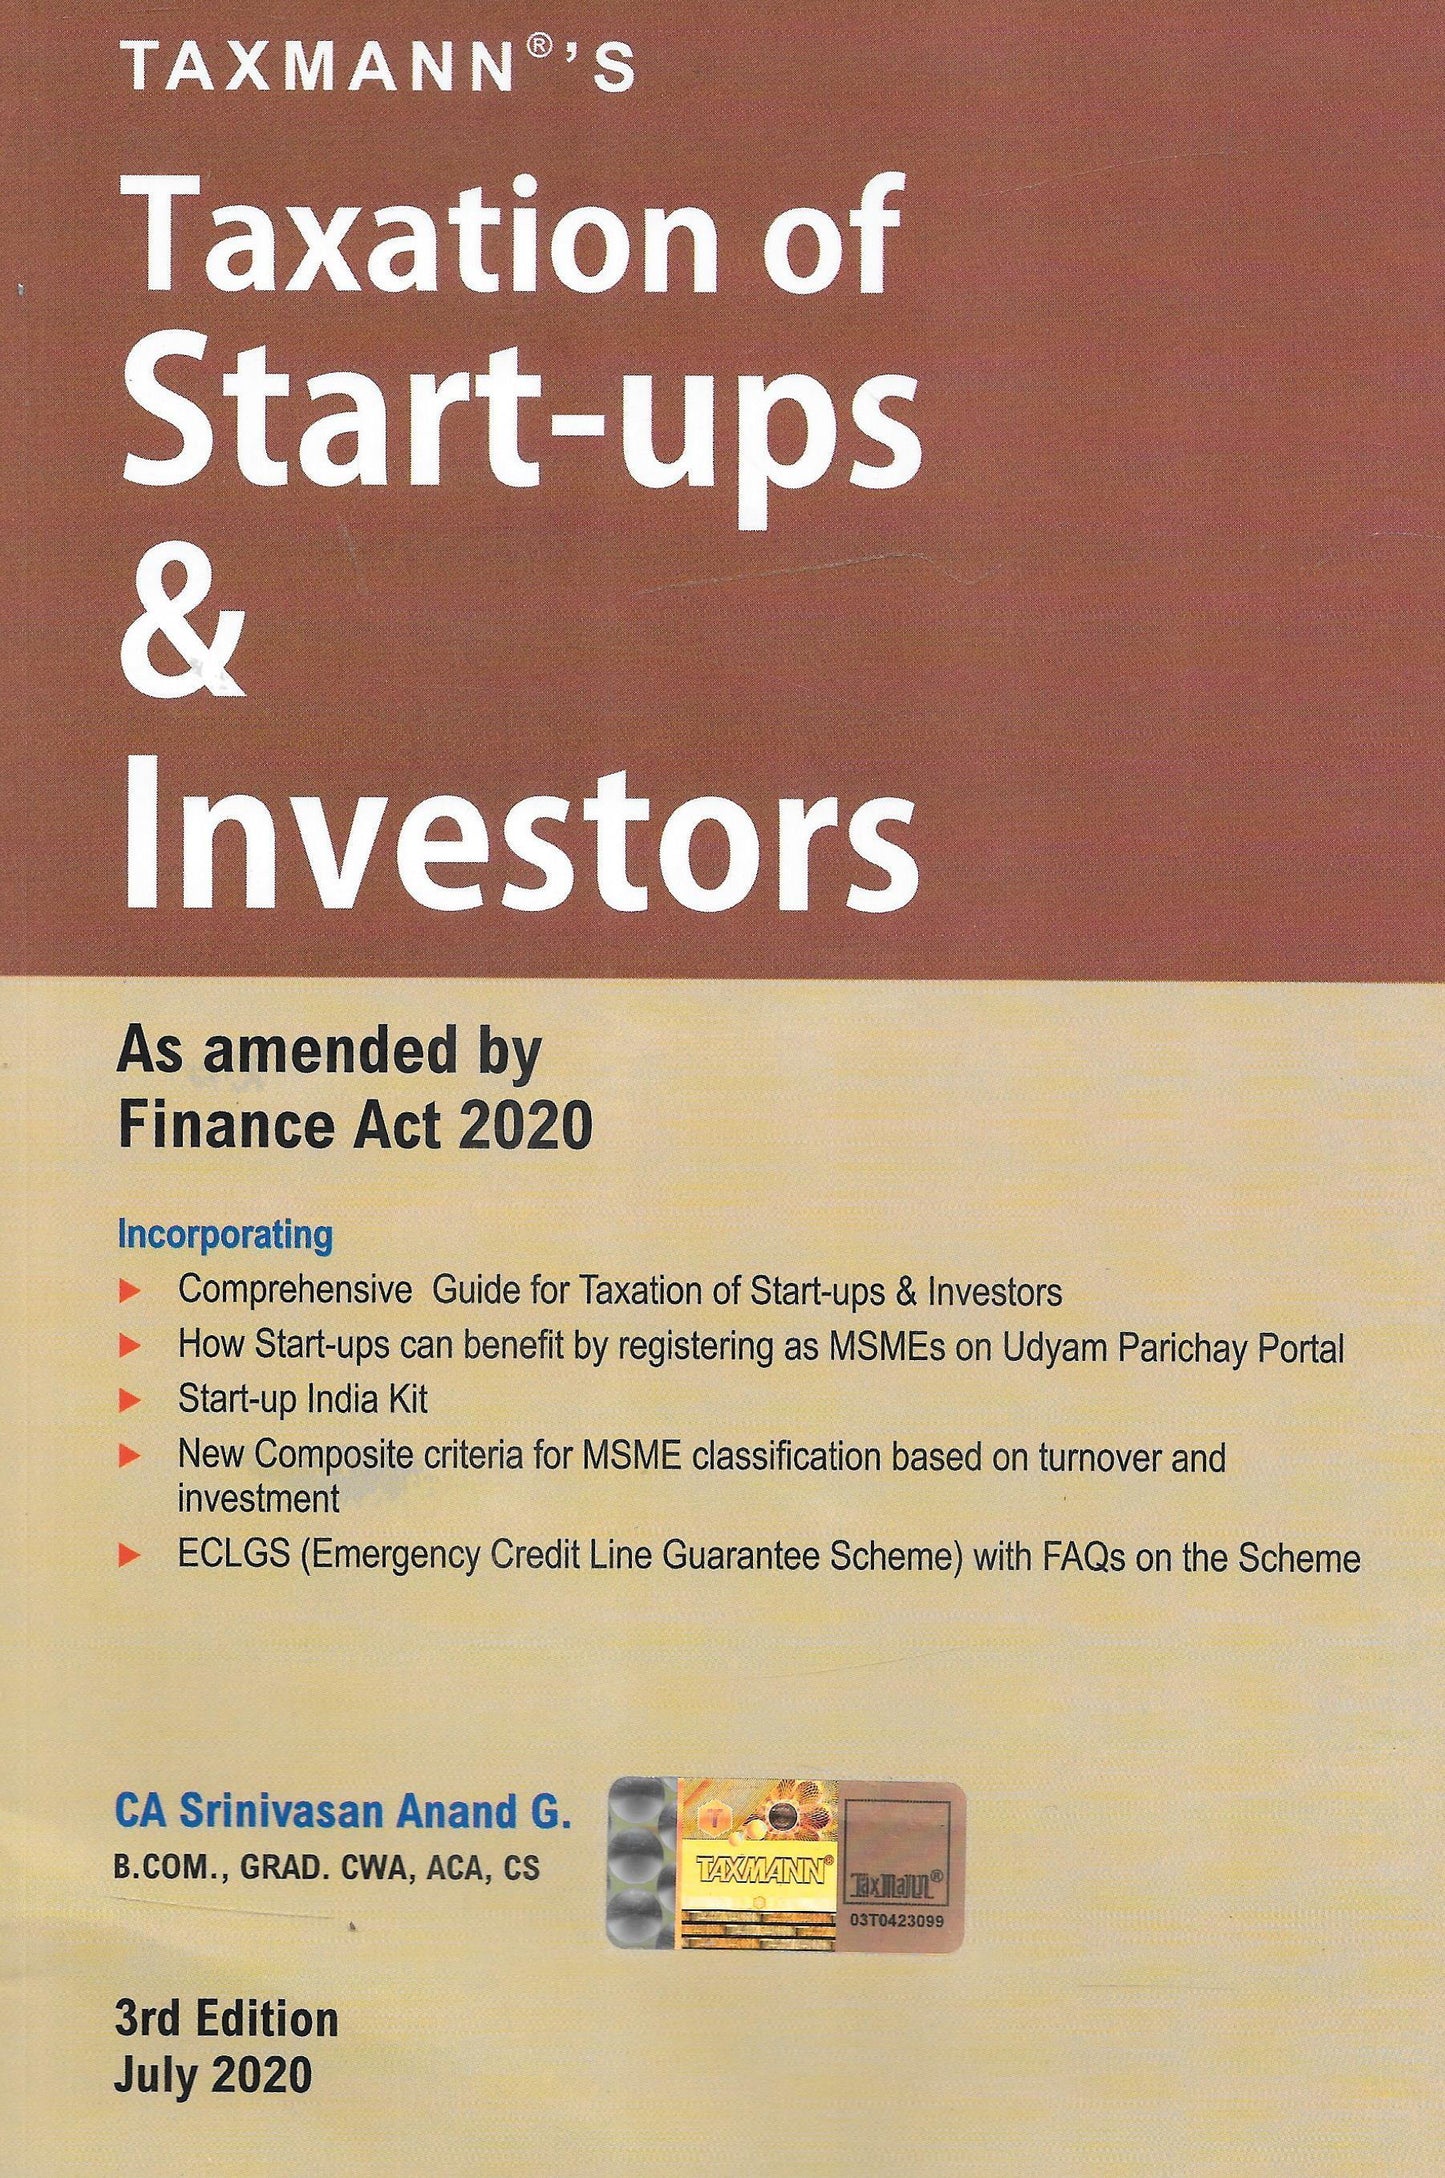 Taxation of Start-Ups & Investors as amended by Finance Act 2020